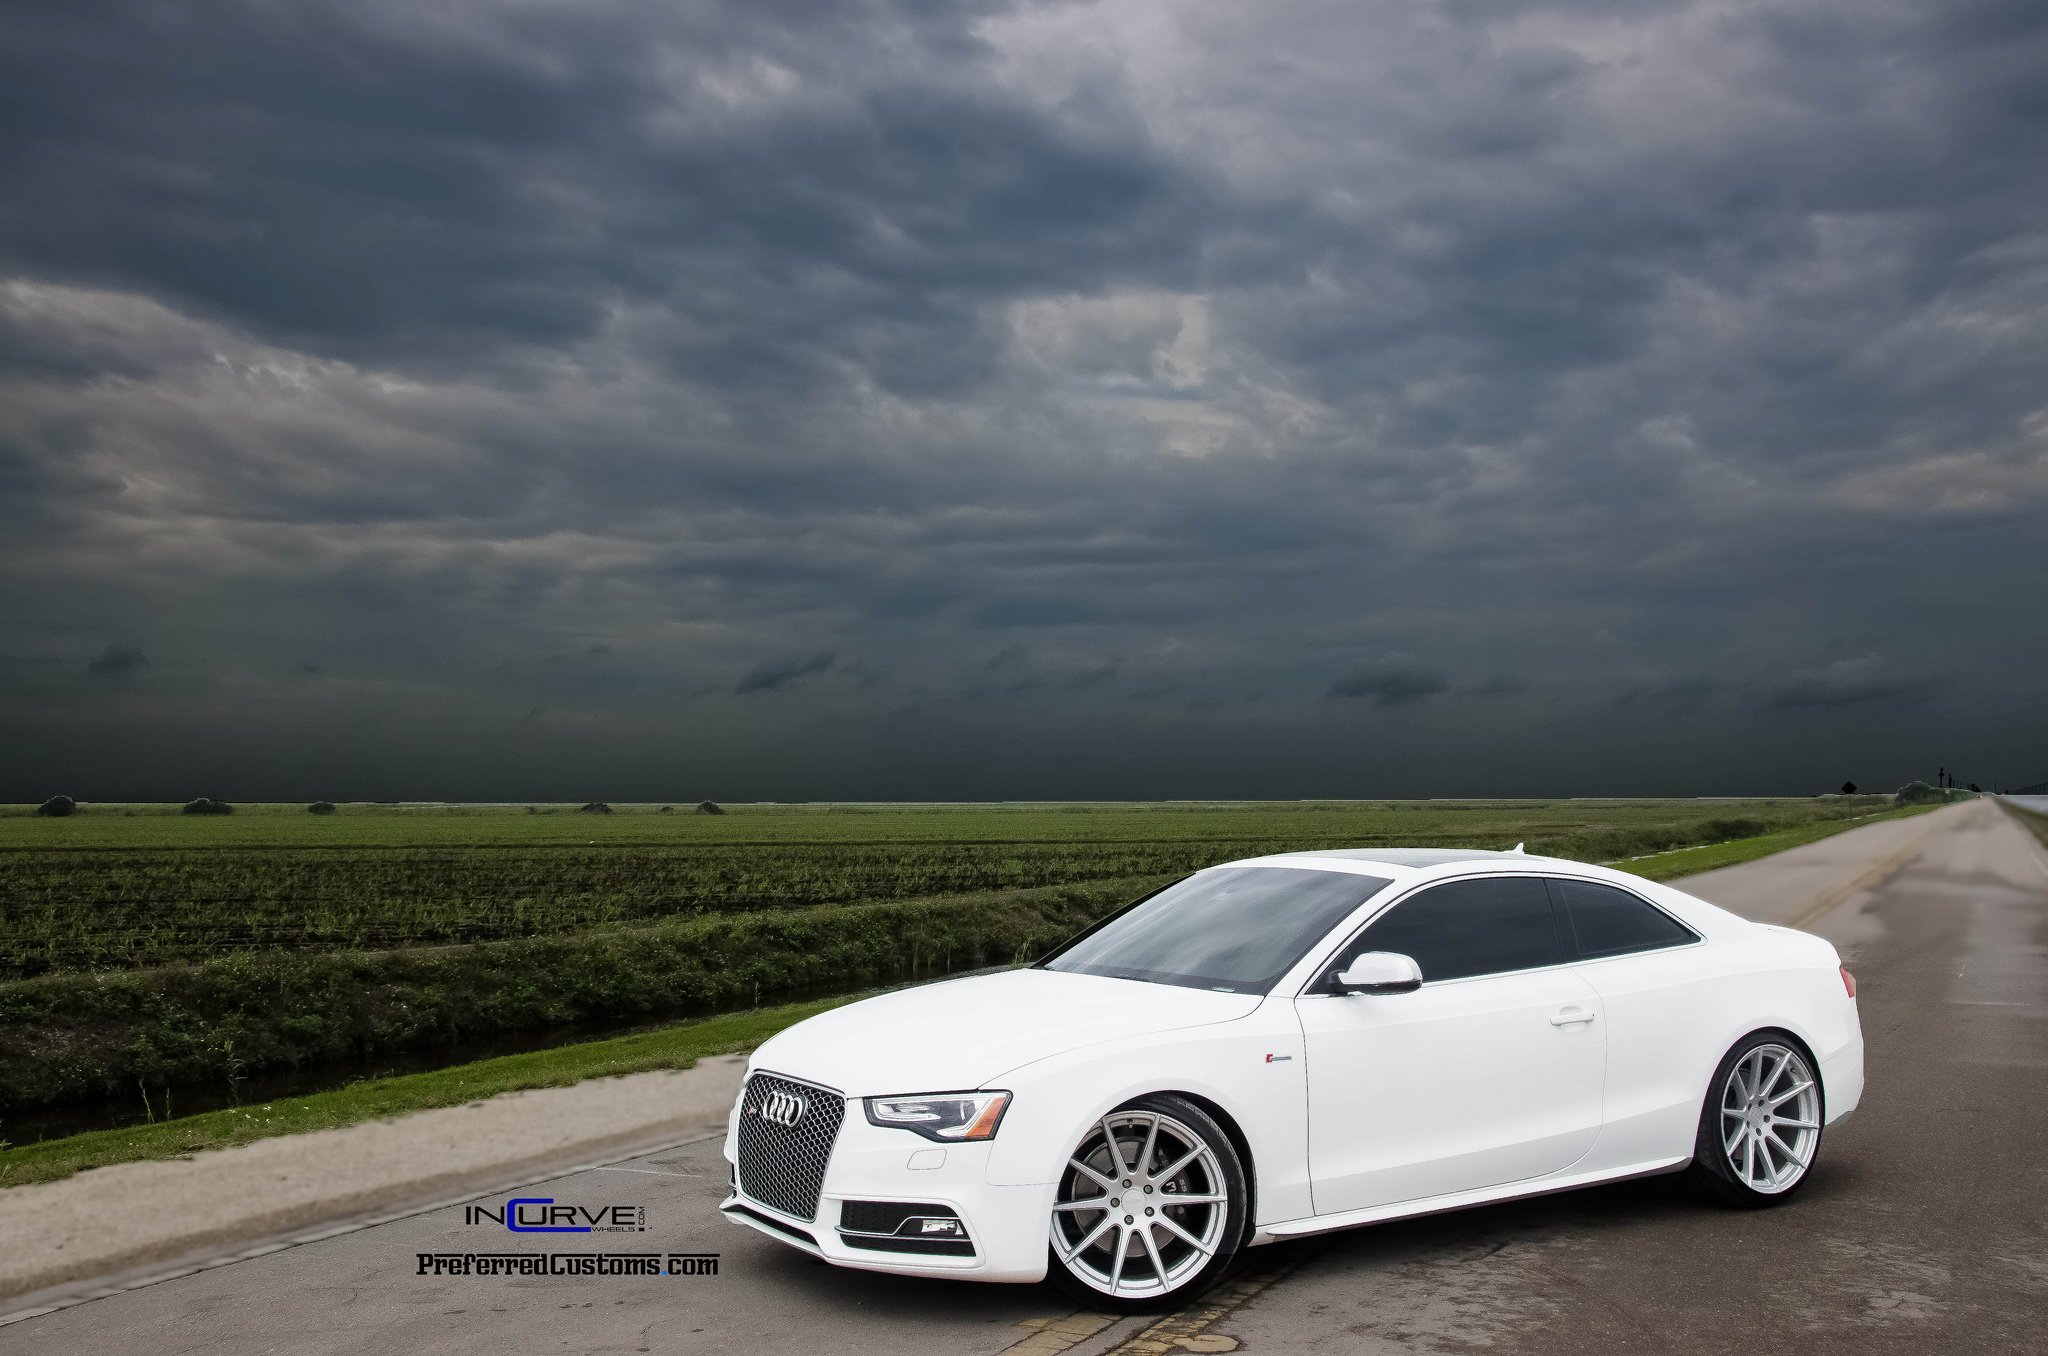 2015, Incurve, Wheels, Cars, Tuning, Audi, S, 5, Coupe Wallpaper